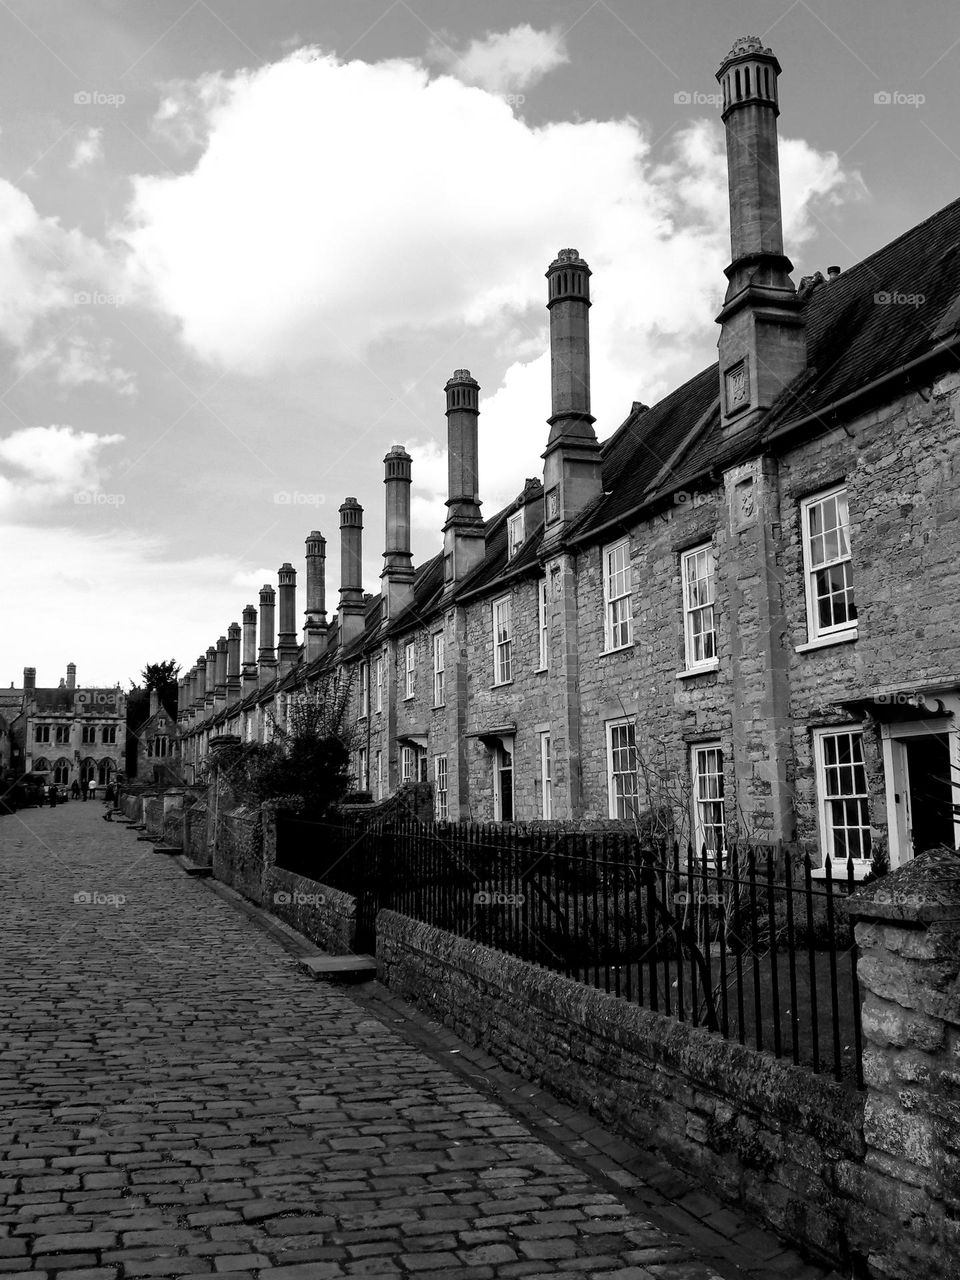 A very Pretty residential street with houses with very tall chimneys